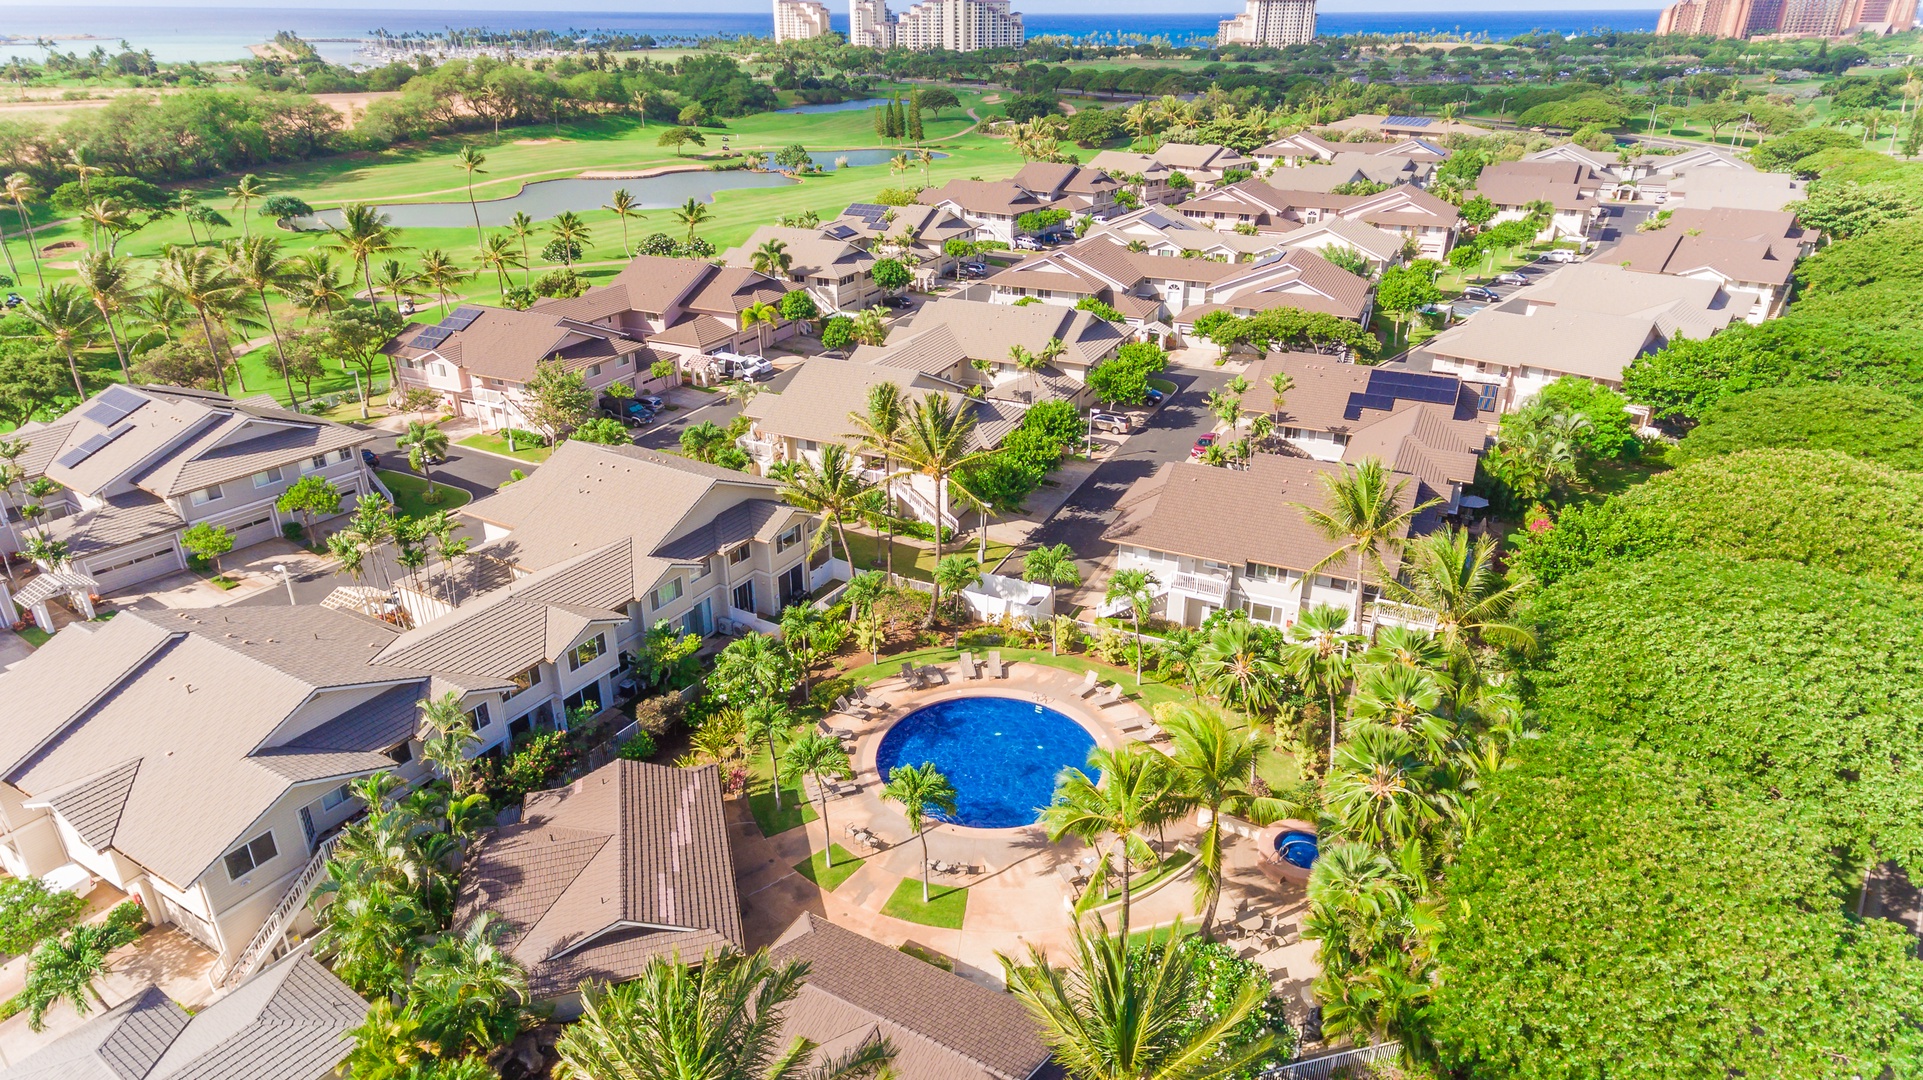 Kapolei Vacation Rentals, Fairways at Ko Olina 33F - Go for a swim in the sparkling waters and rest in the lounge chairs at the community pool.